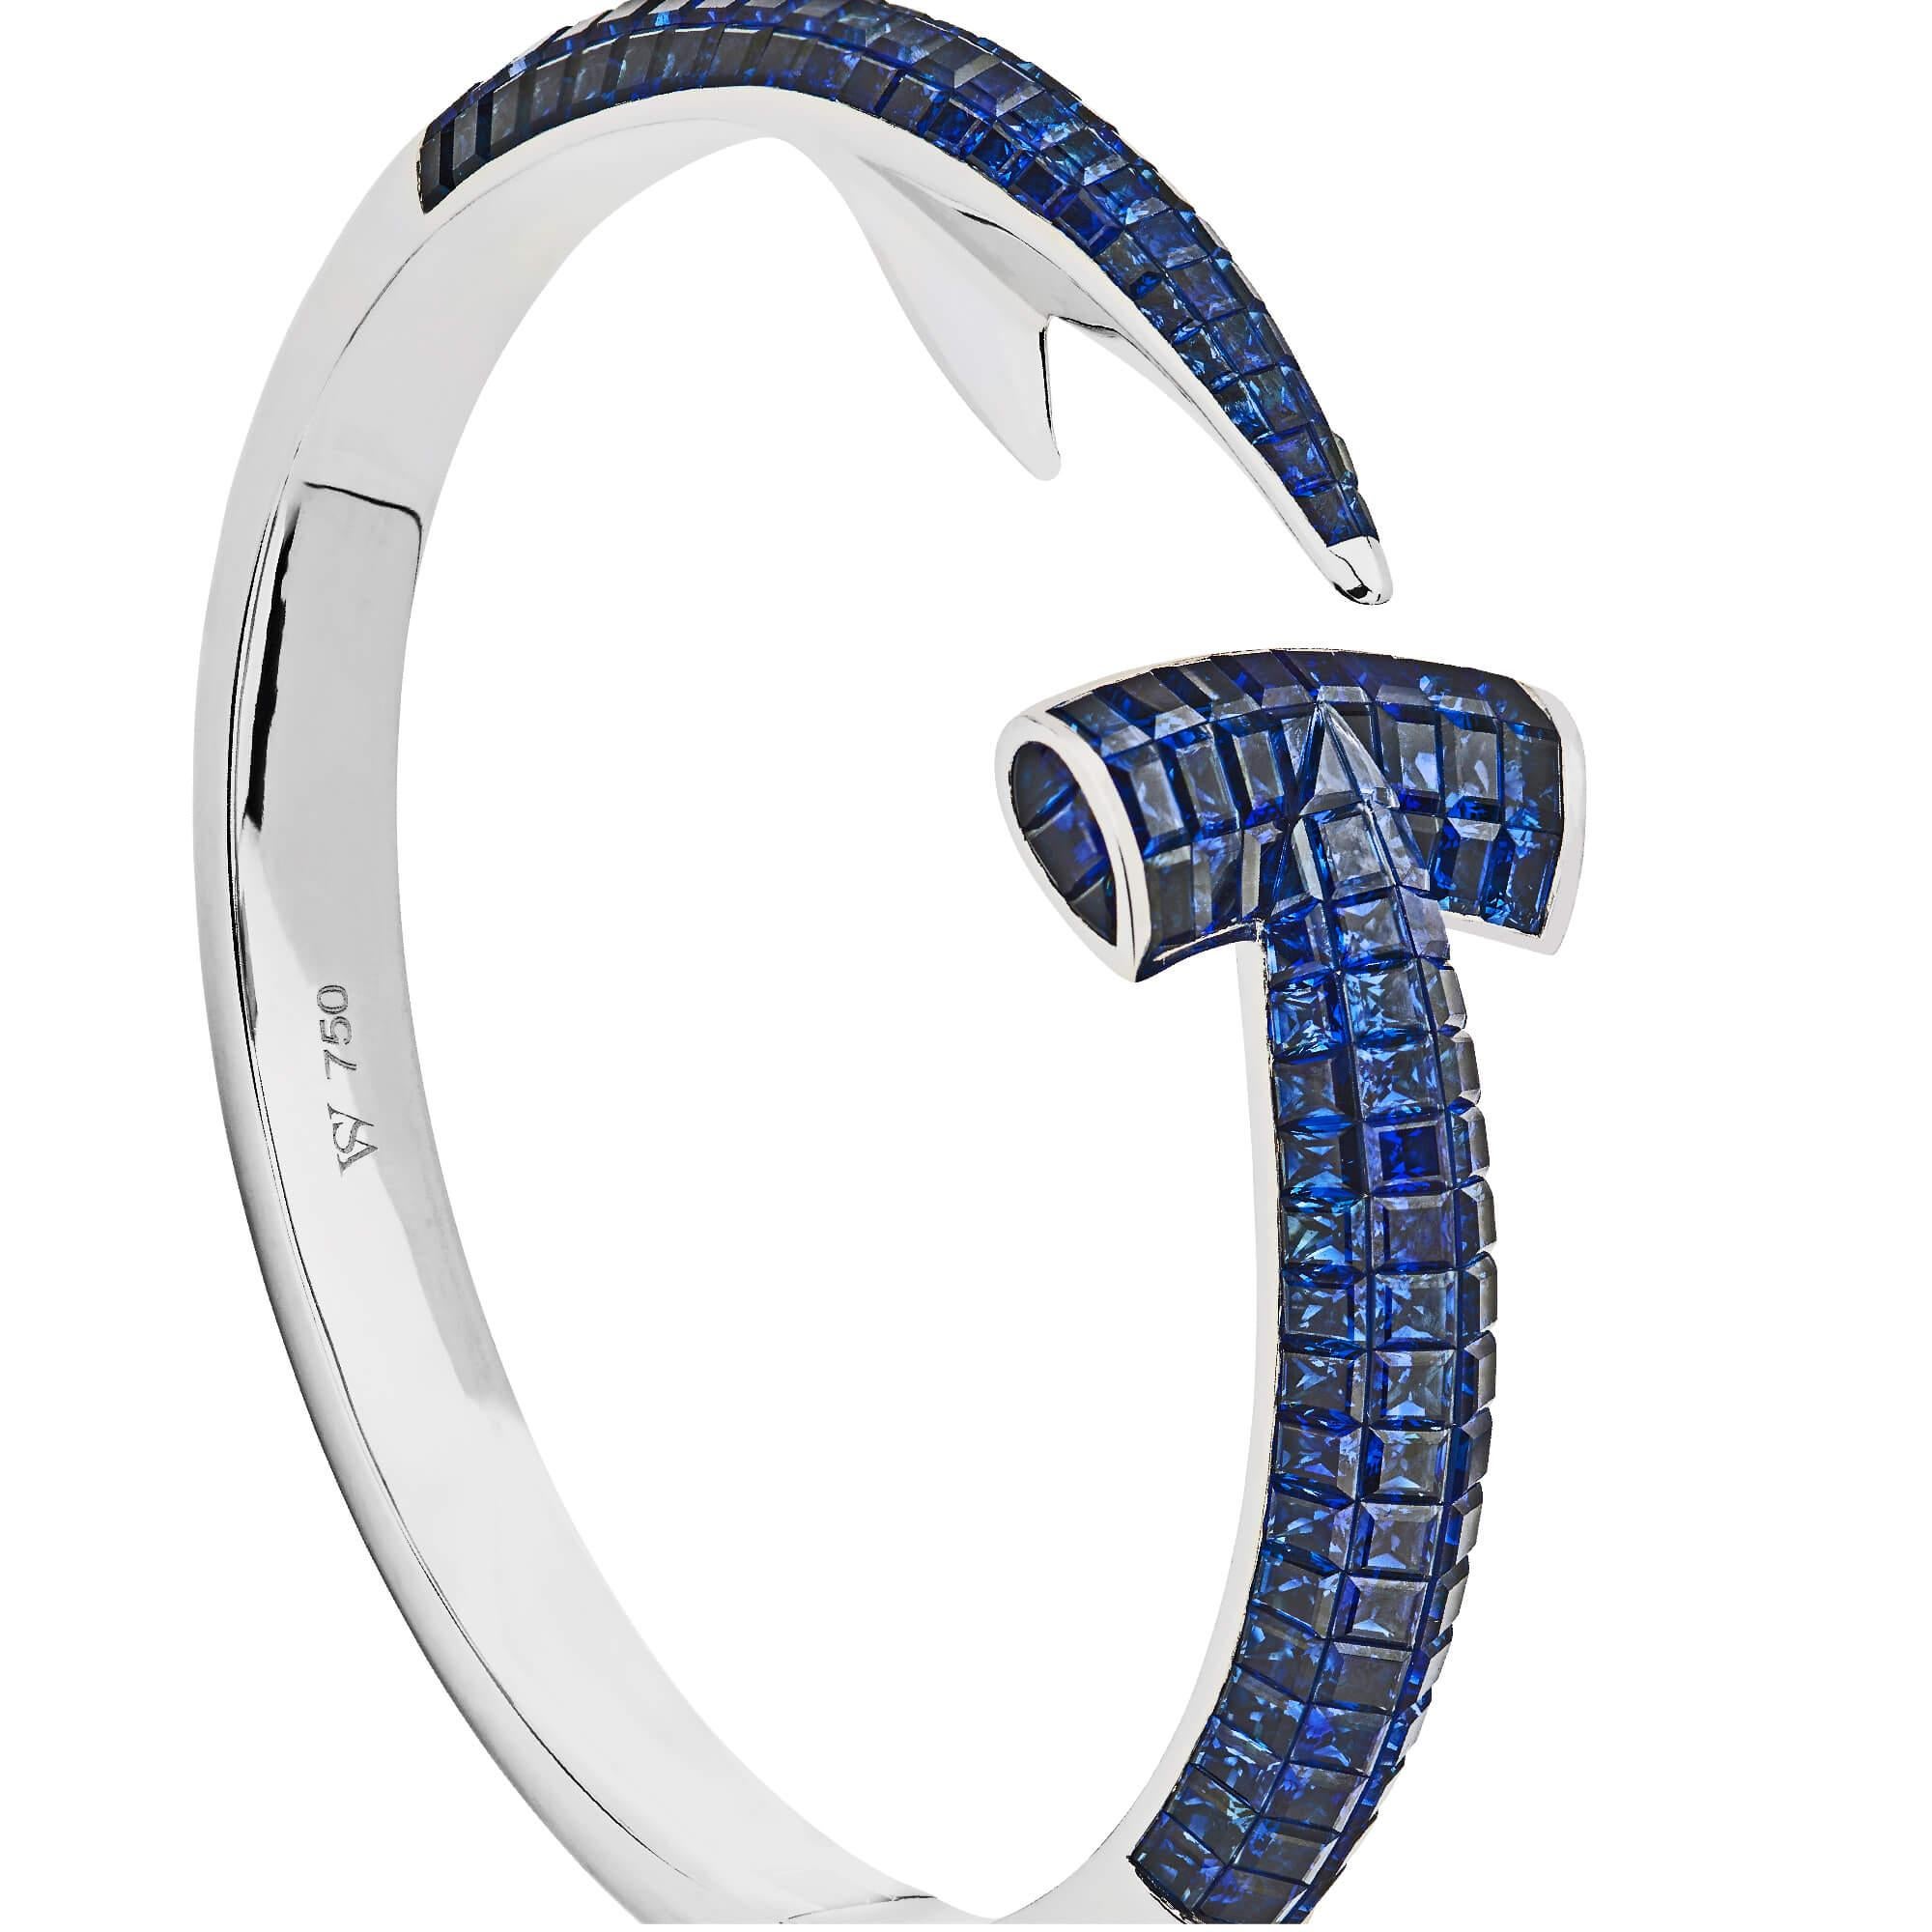 Dive for precious bounty with the Hammerhead Sapphire Bangle. The Hammerhead sapphire bangle combines Webster's love of the aquatic with a sleek silhouette and intricate gem setting.

Hand crafted in 18ct white gold and completed with square cut